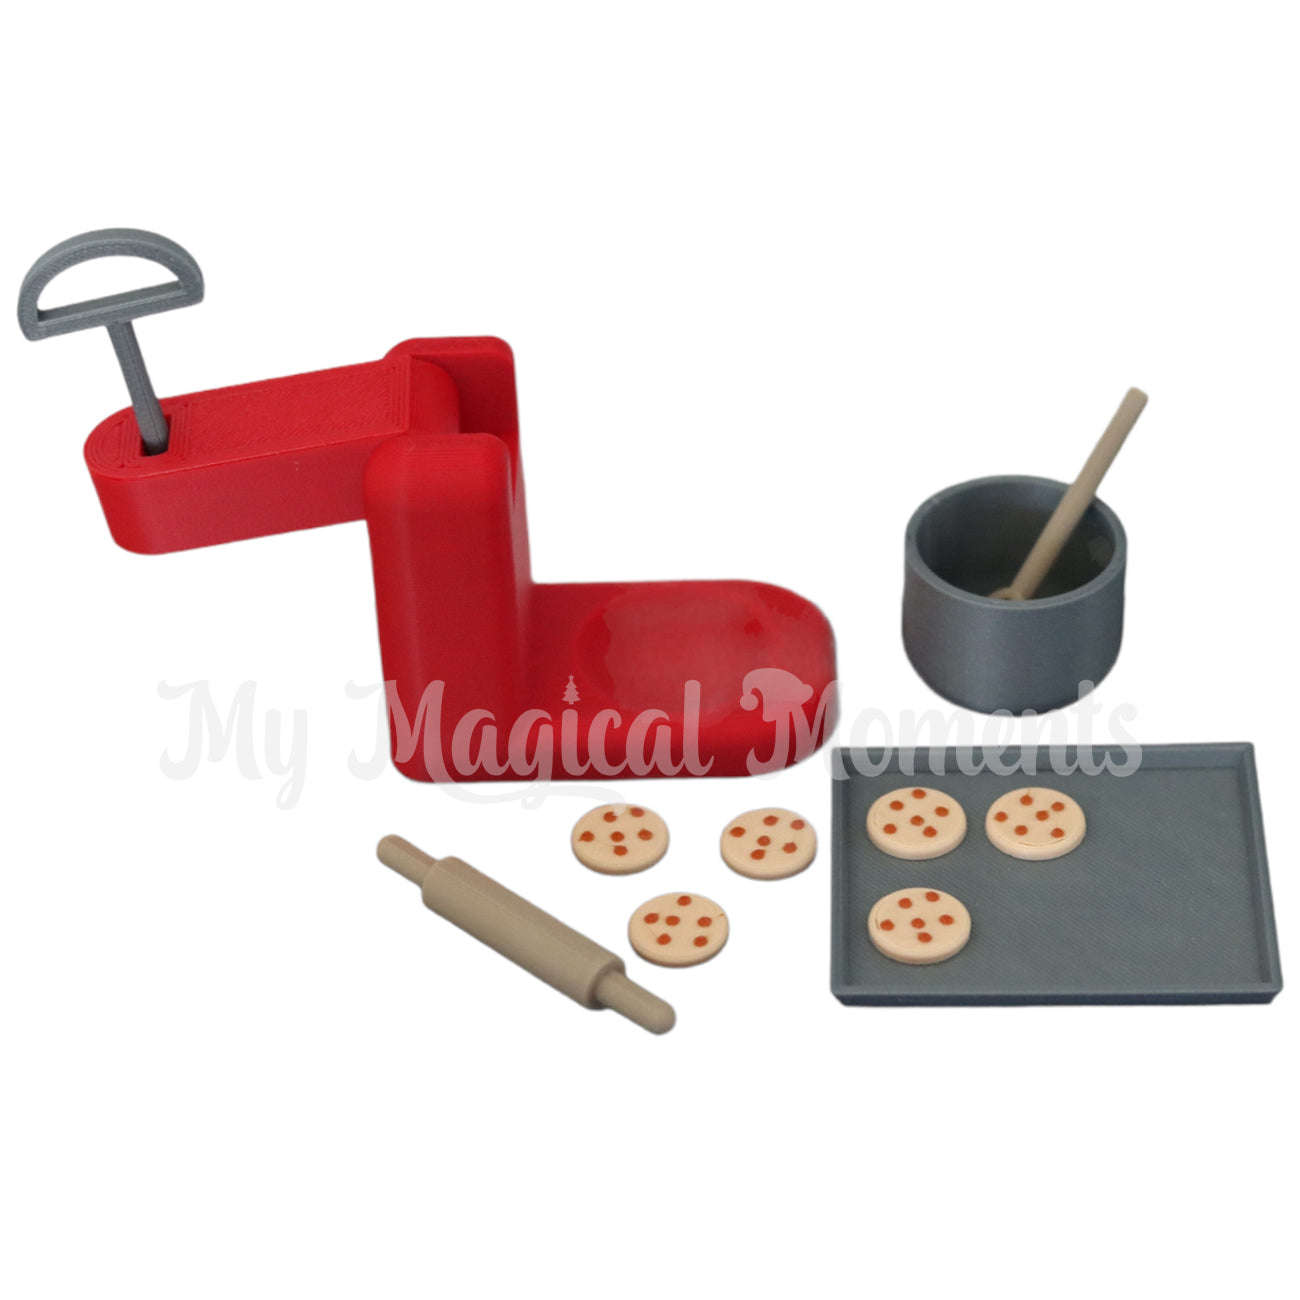 Open Miniature mixer with bowl, cookies, rolling pin